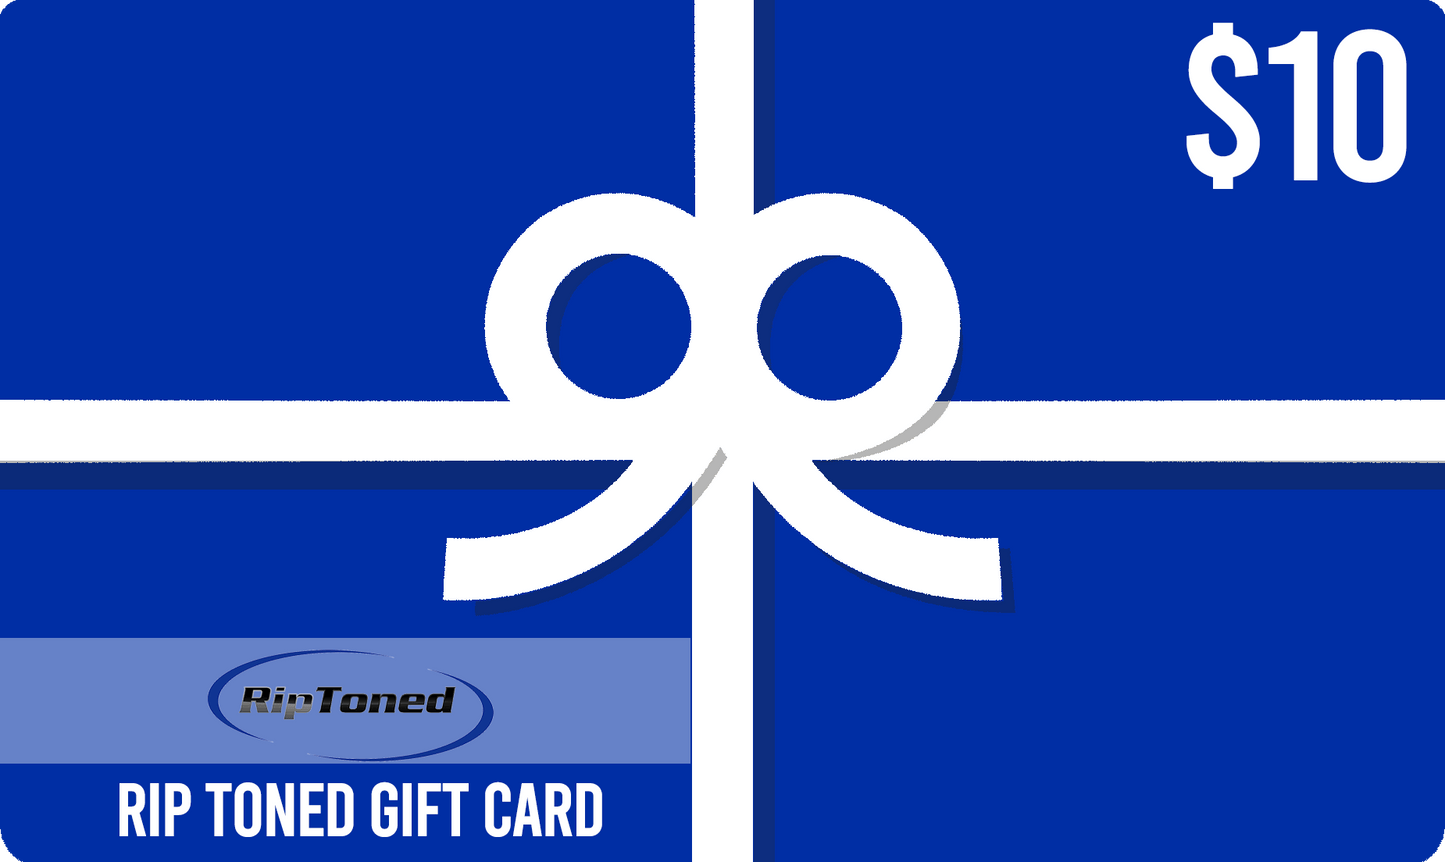 Rip Toned Gift Cards - Rip Toned